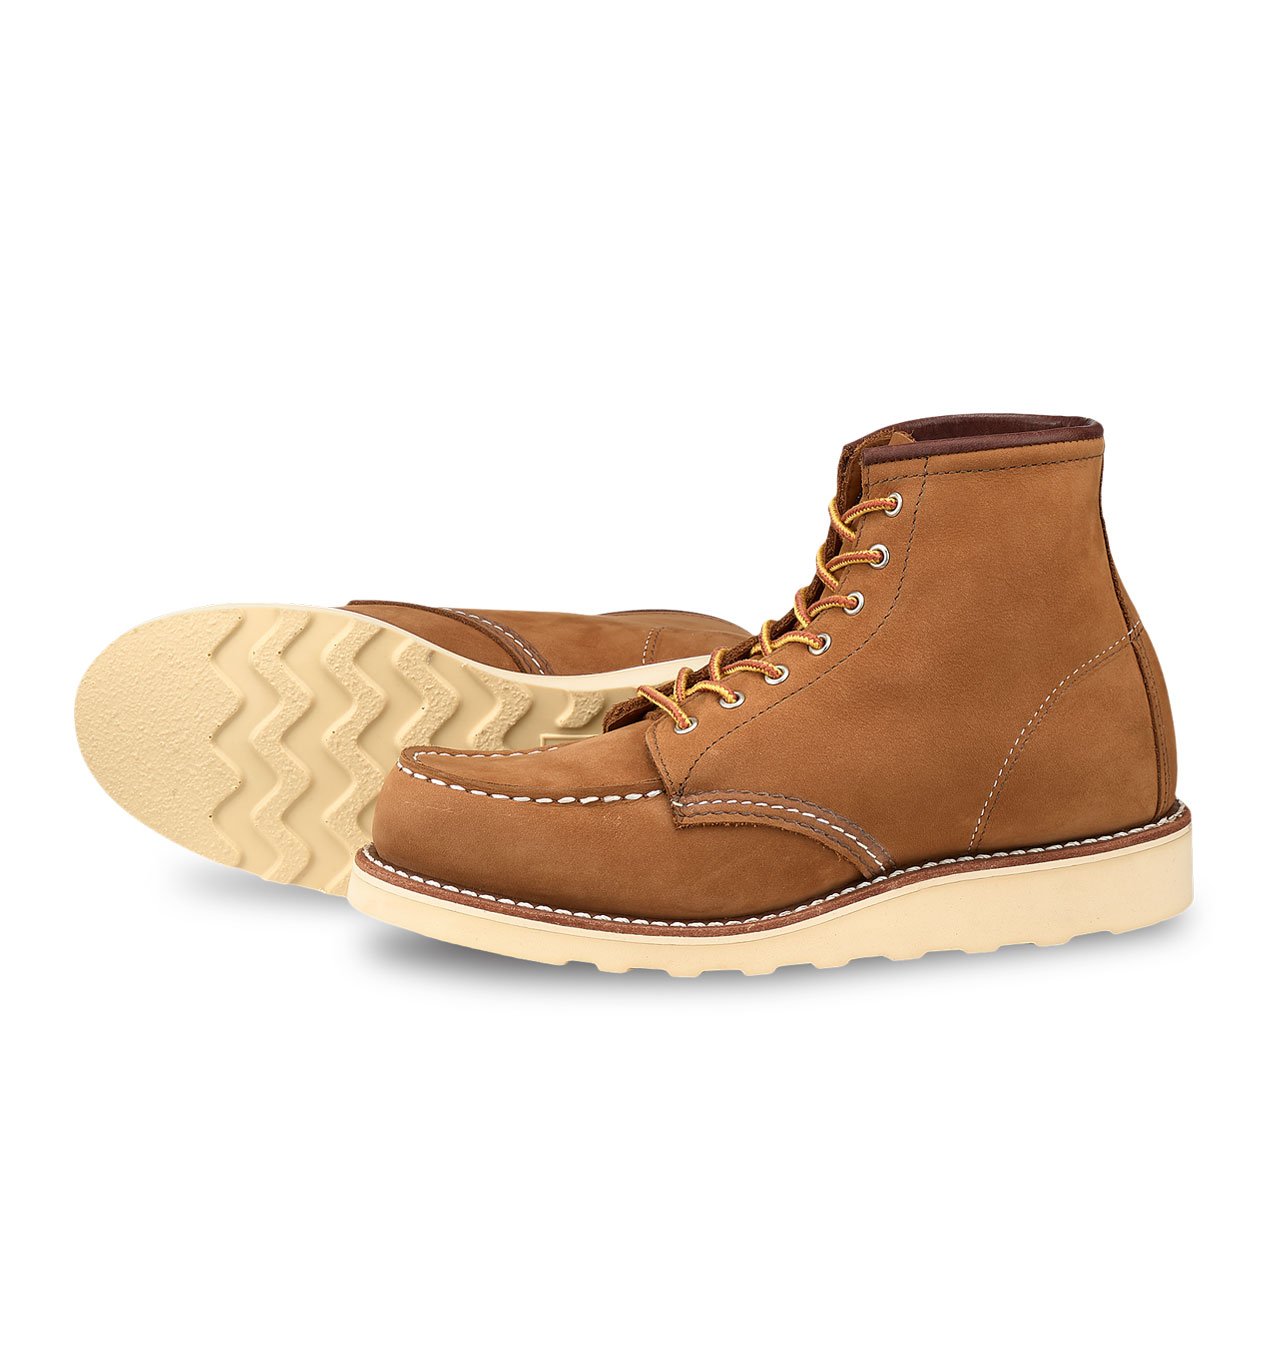 Red Wing Shoes Woman 3372 6-Inch Moc Toe - Honey Chinook Leather